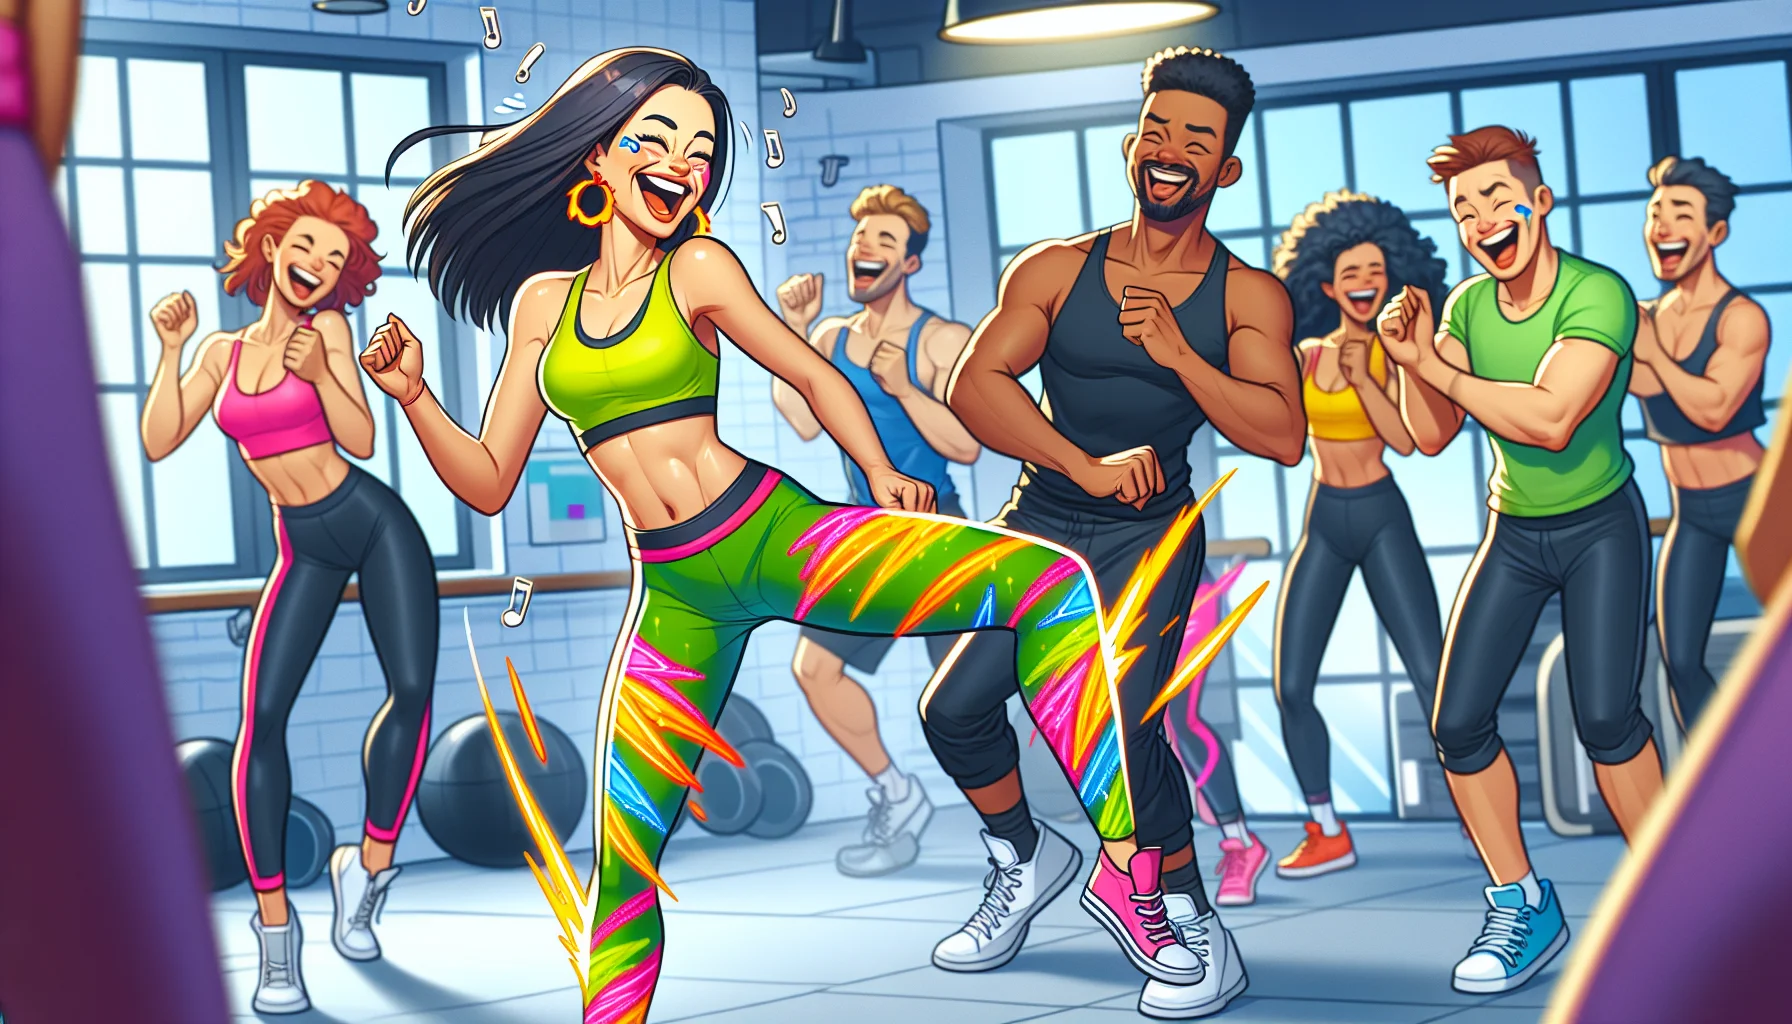 Illustrate a hilariously enchanting scenario in a gym with neon-colored zumba leggings stealing the limelight. Show these leggings belonging to a Caucasian woman energetically dancing her heart out, and a Black male instructor chuckling at her spirited moves. Other people in the background, including a South Asian man and a Hispanic woman, are inspired by her enthusiasm and begin to rev up their workouts too. The ambiance of the gym is lively, underlining the joy of exercise.